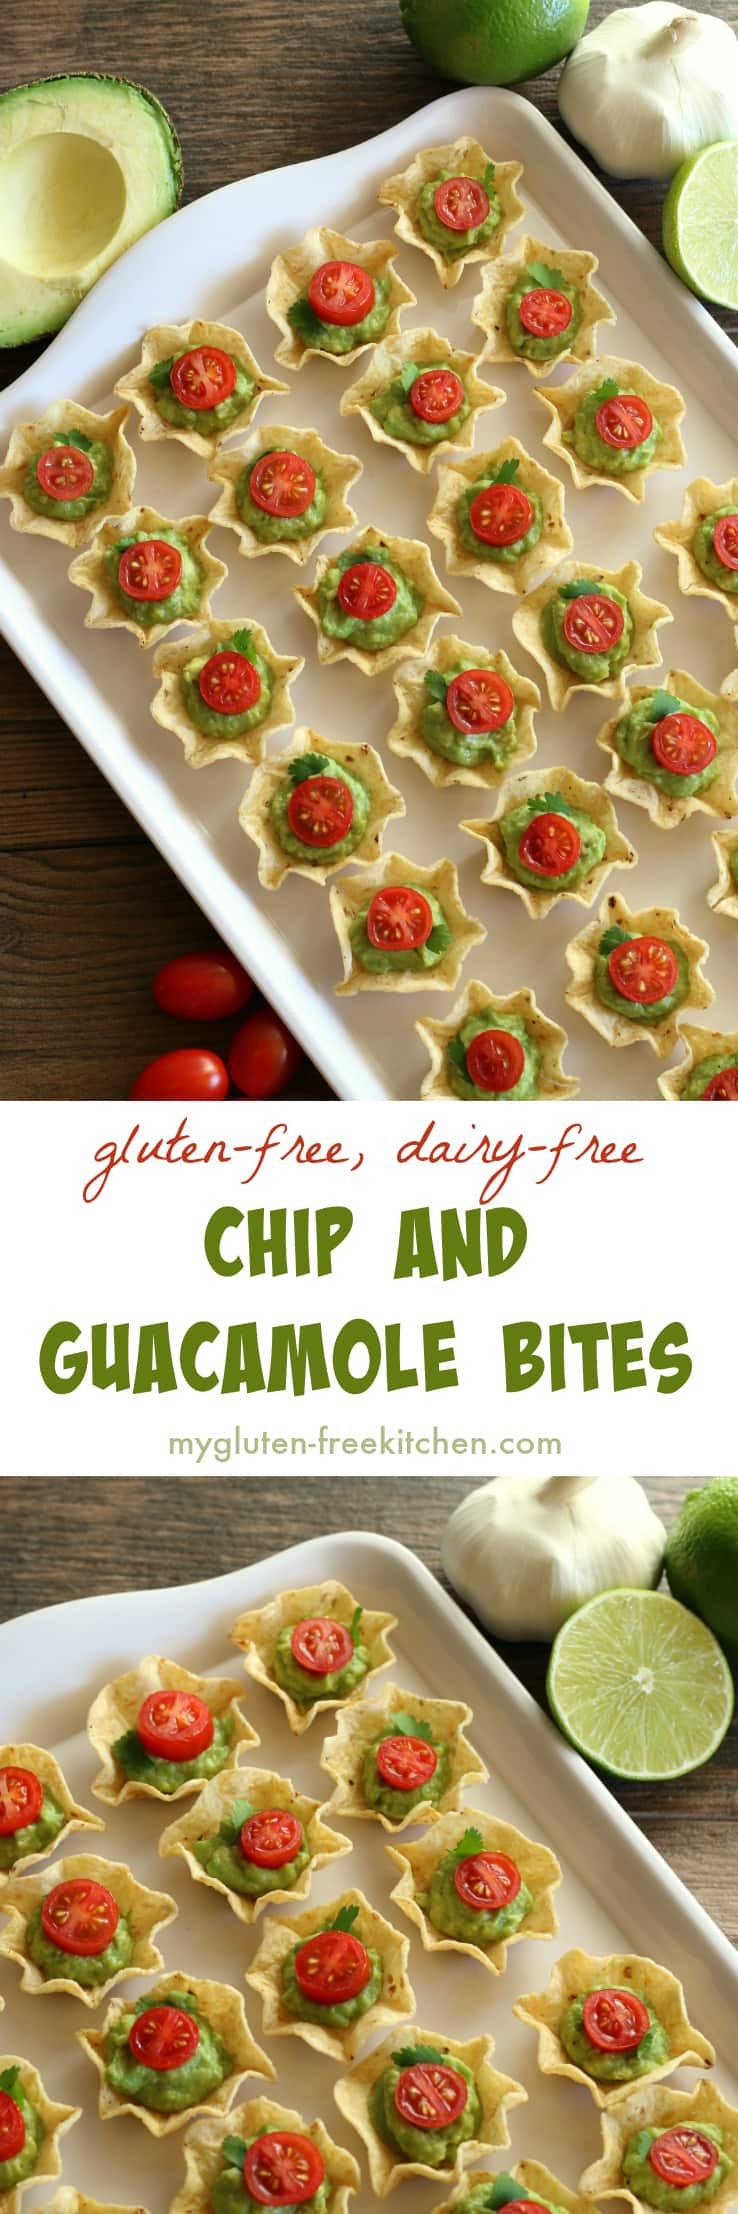 Dairy Free Appetizers
 Gluten free Chip and Guacamole Bites